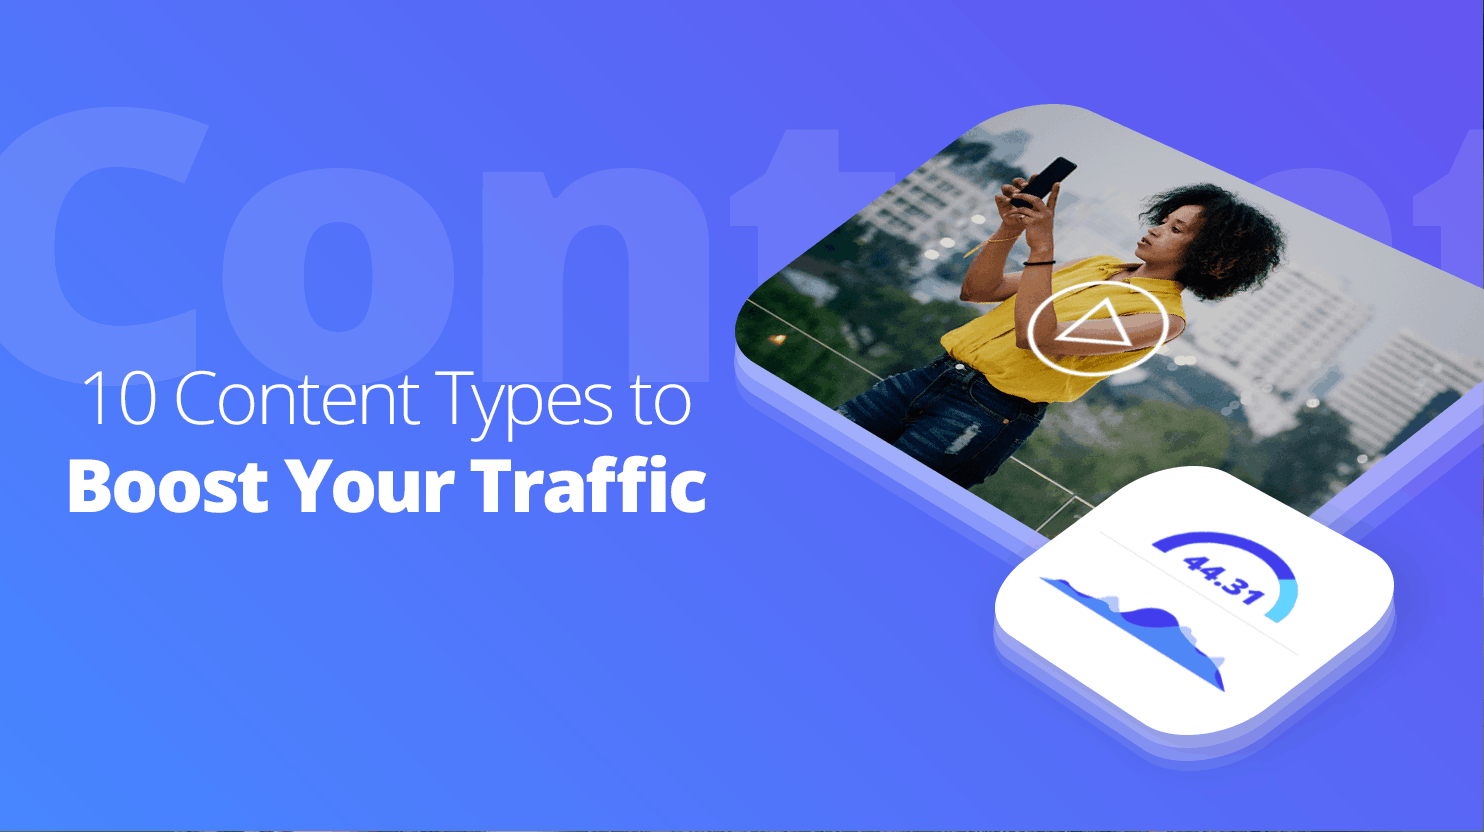 10 Content Types to Boost Your Traffic